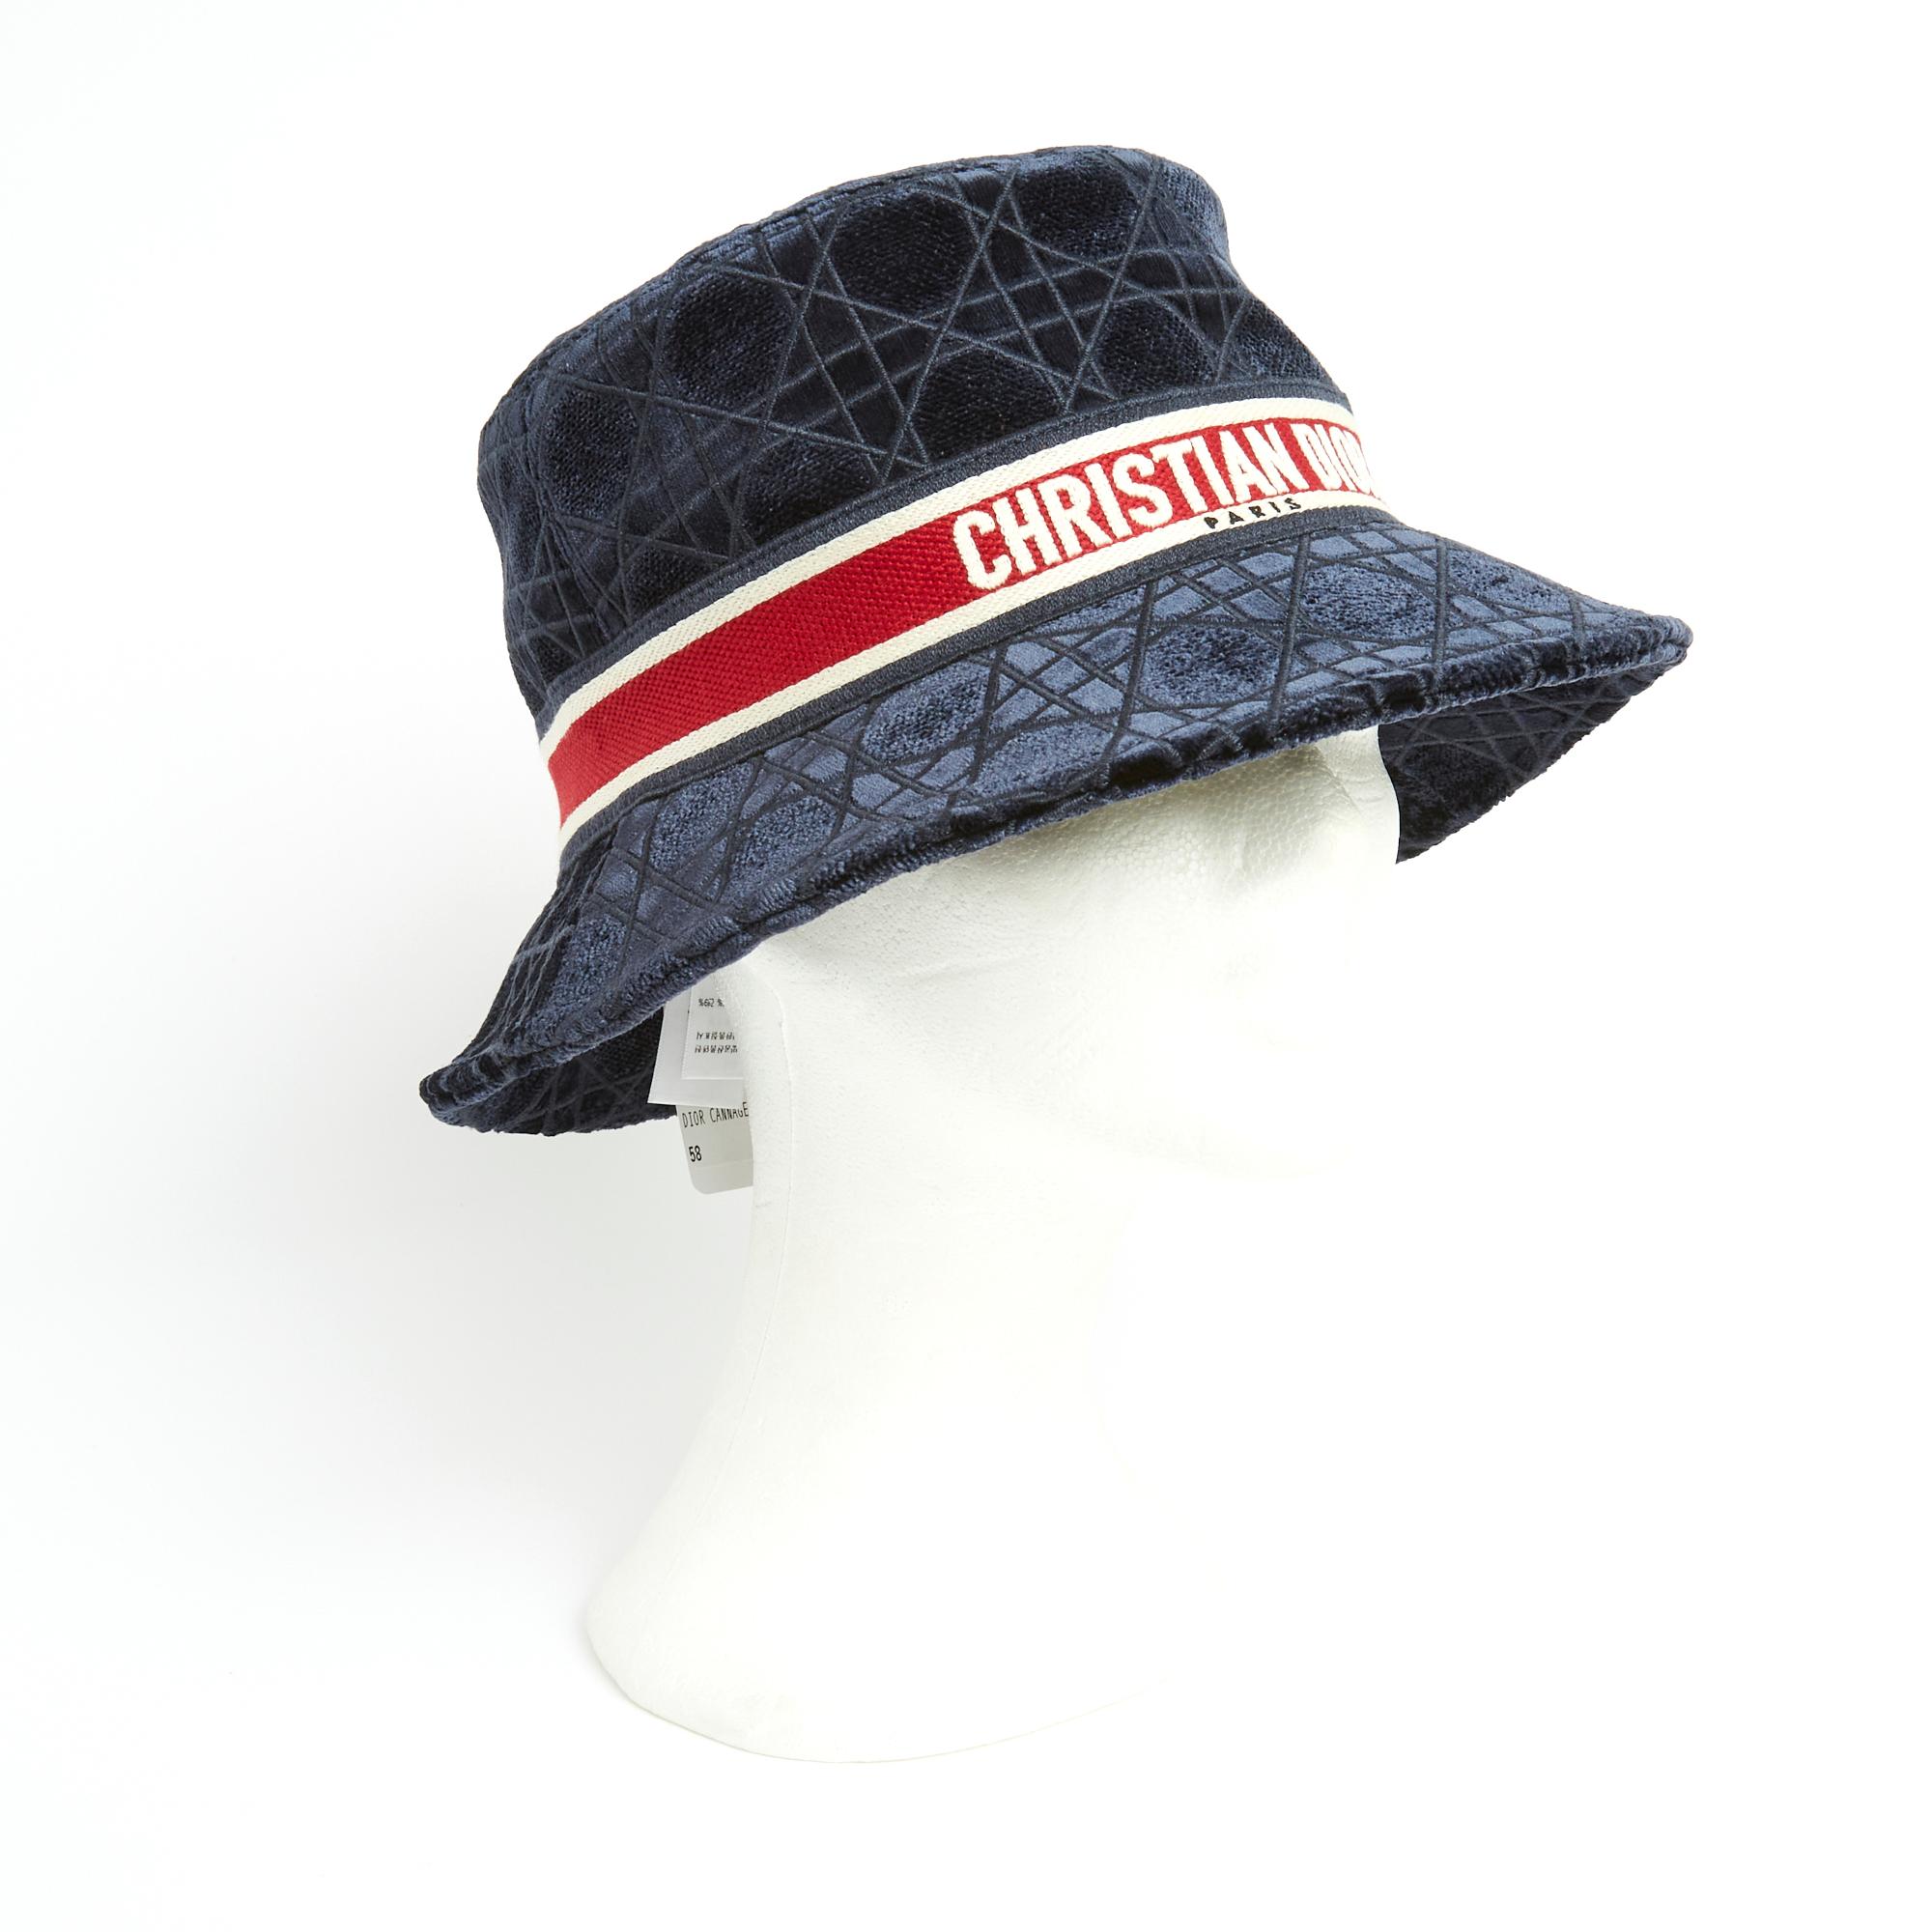 Christian Dior hat, D-Bobby model, in quilted navy blue velvet with small brim cannage motif, contrasting ribbon inscribed Christian Dior Paris, matching cotton lining. Size 58. The hat is probably from private sales, in perfect condition, with its